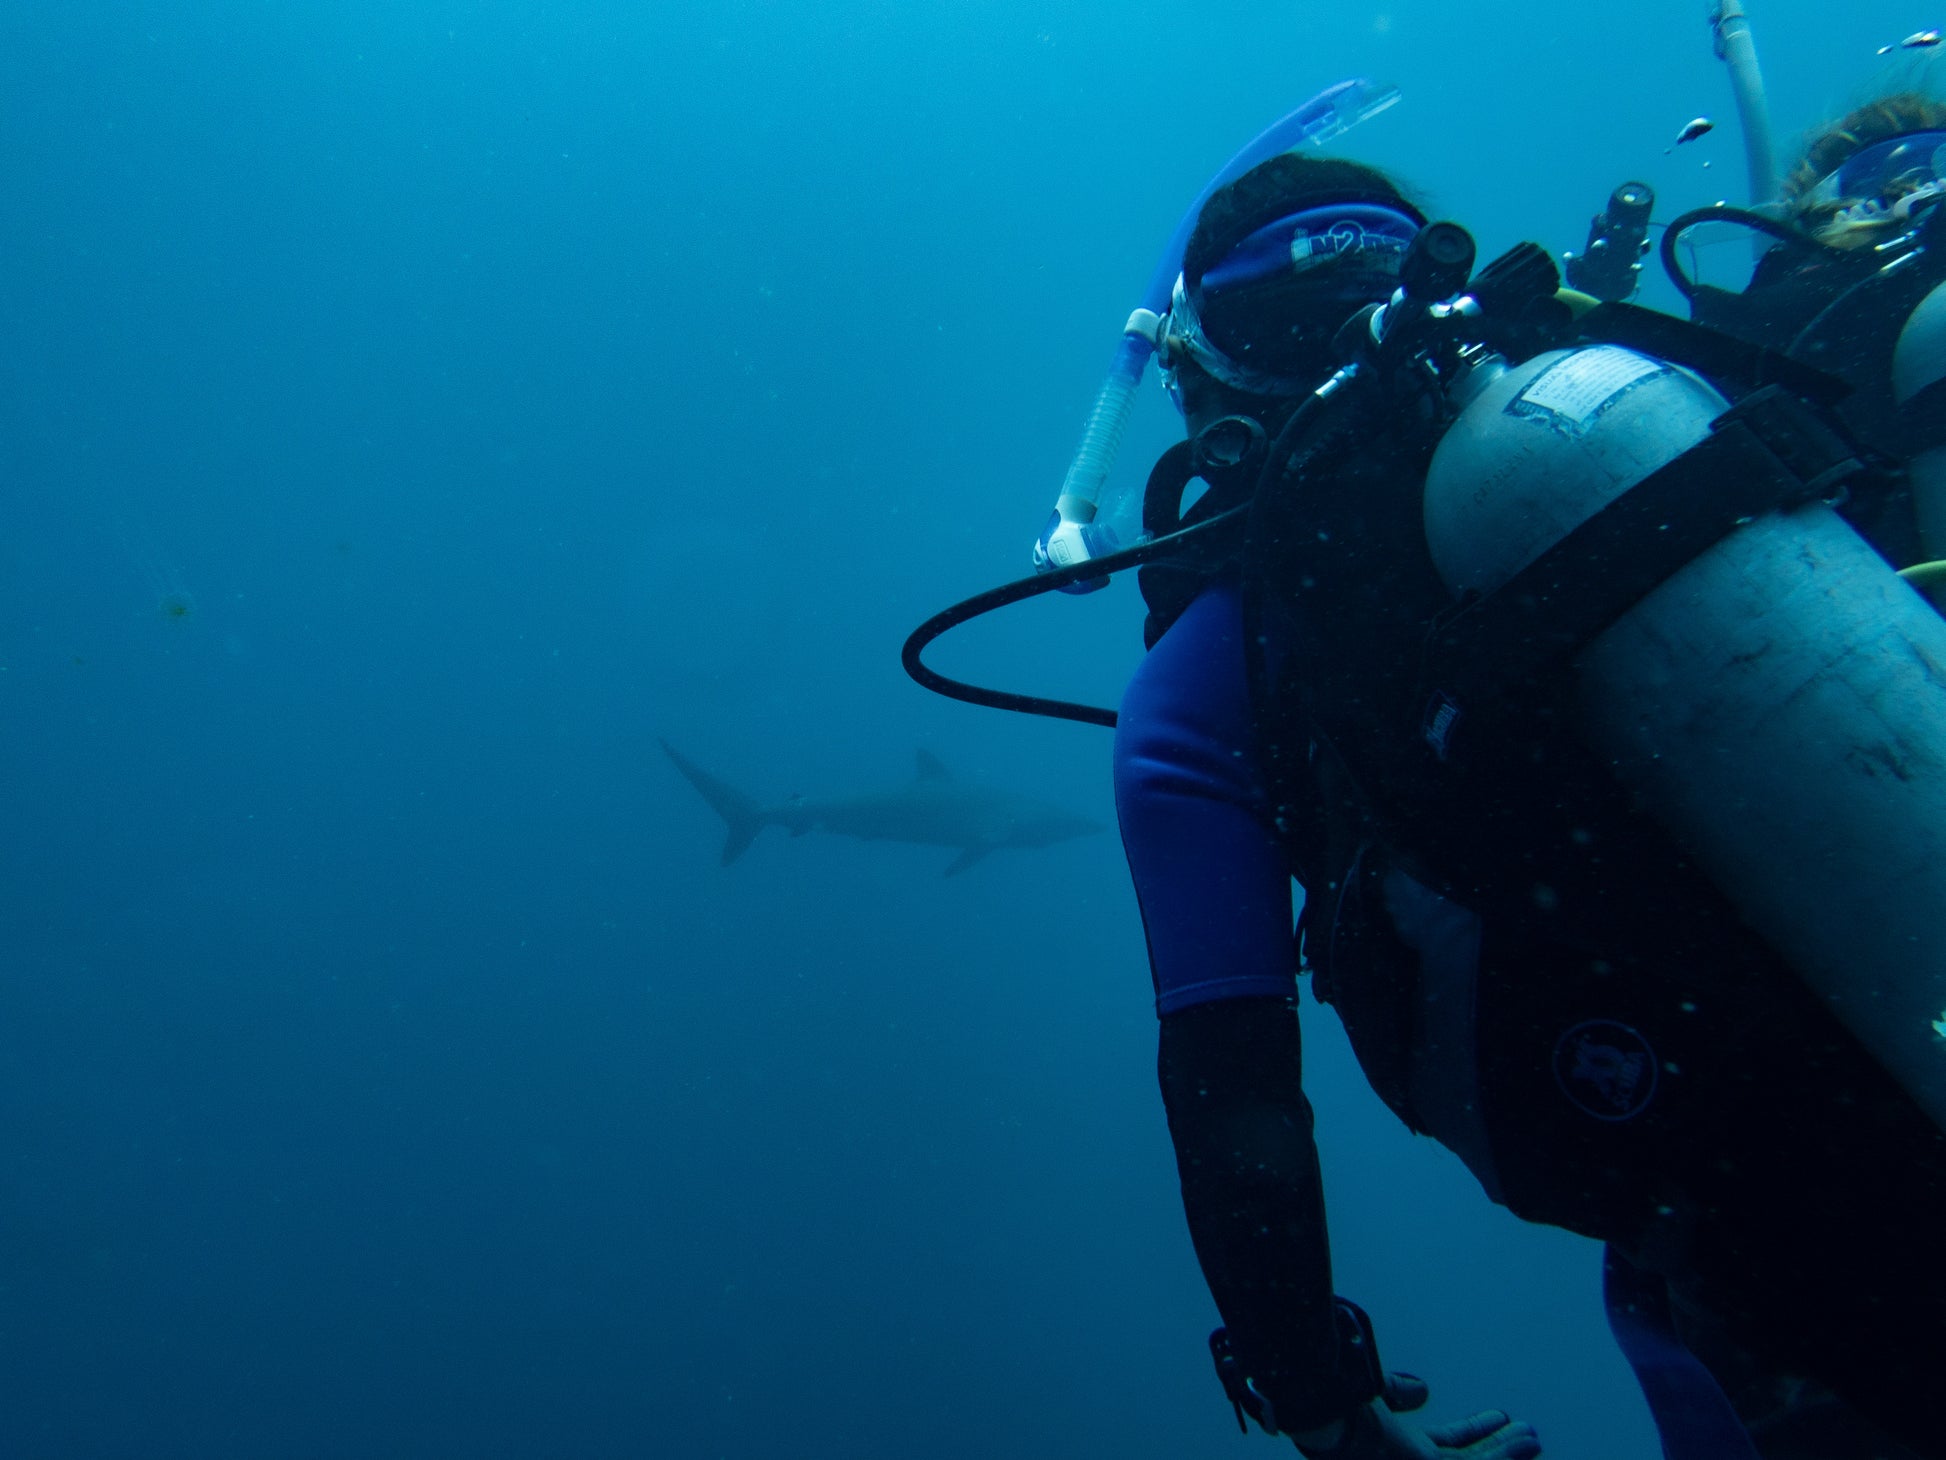 Scuba divers spot a shark in Los Cabos Mexico while scuba diving on a small group trip.